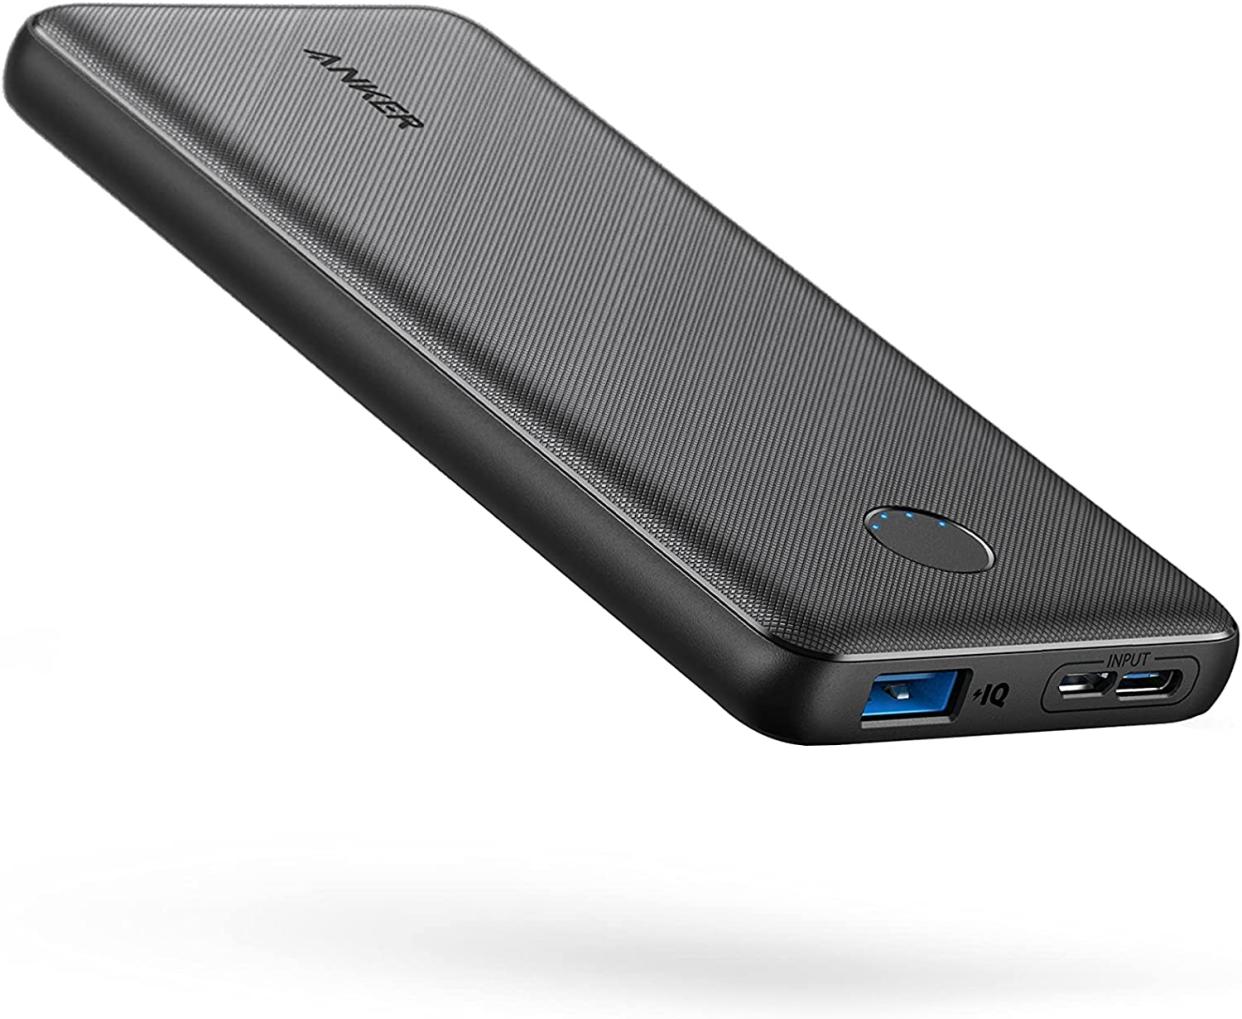 Anker Portable Charger, 313 Power Bank (Amazon)